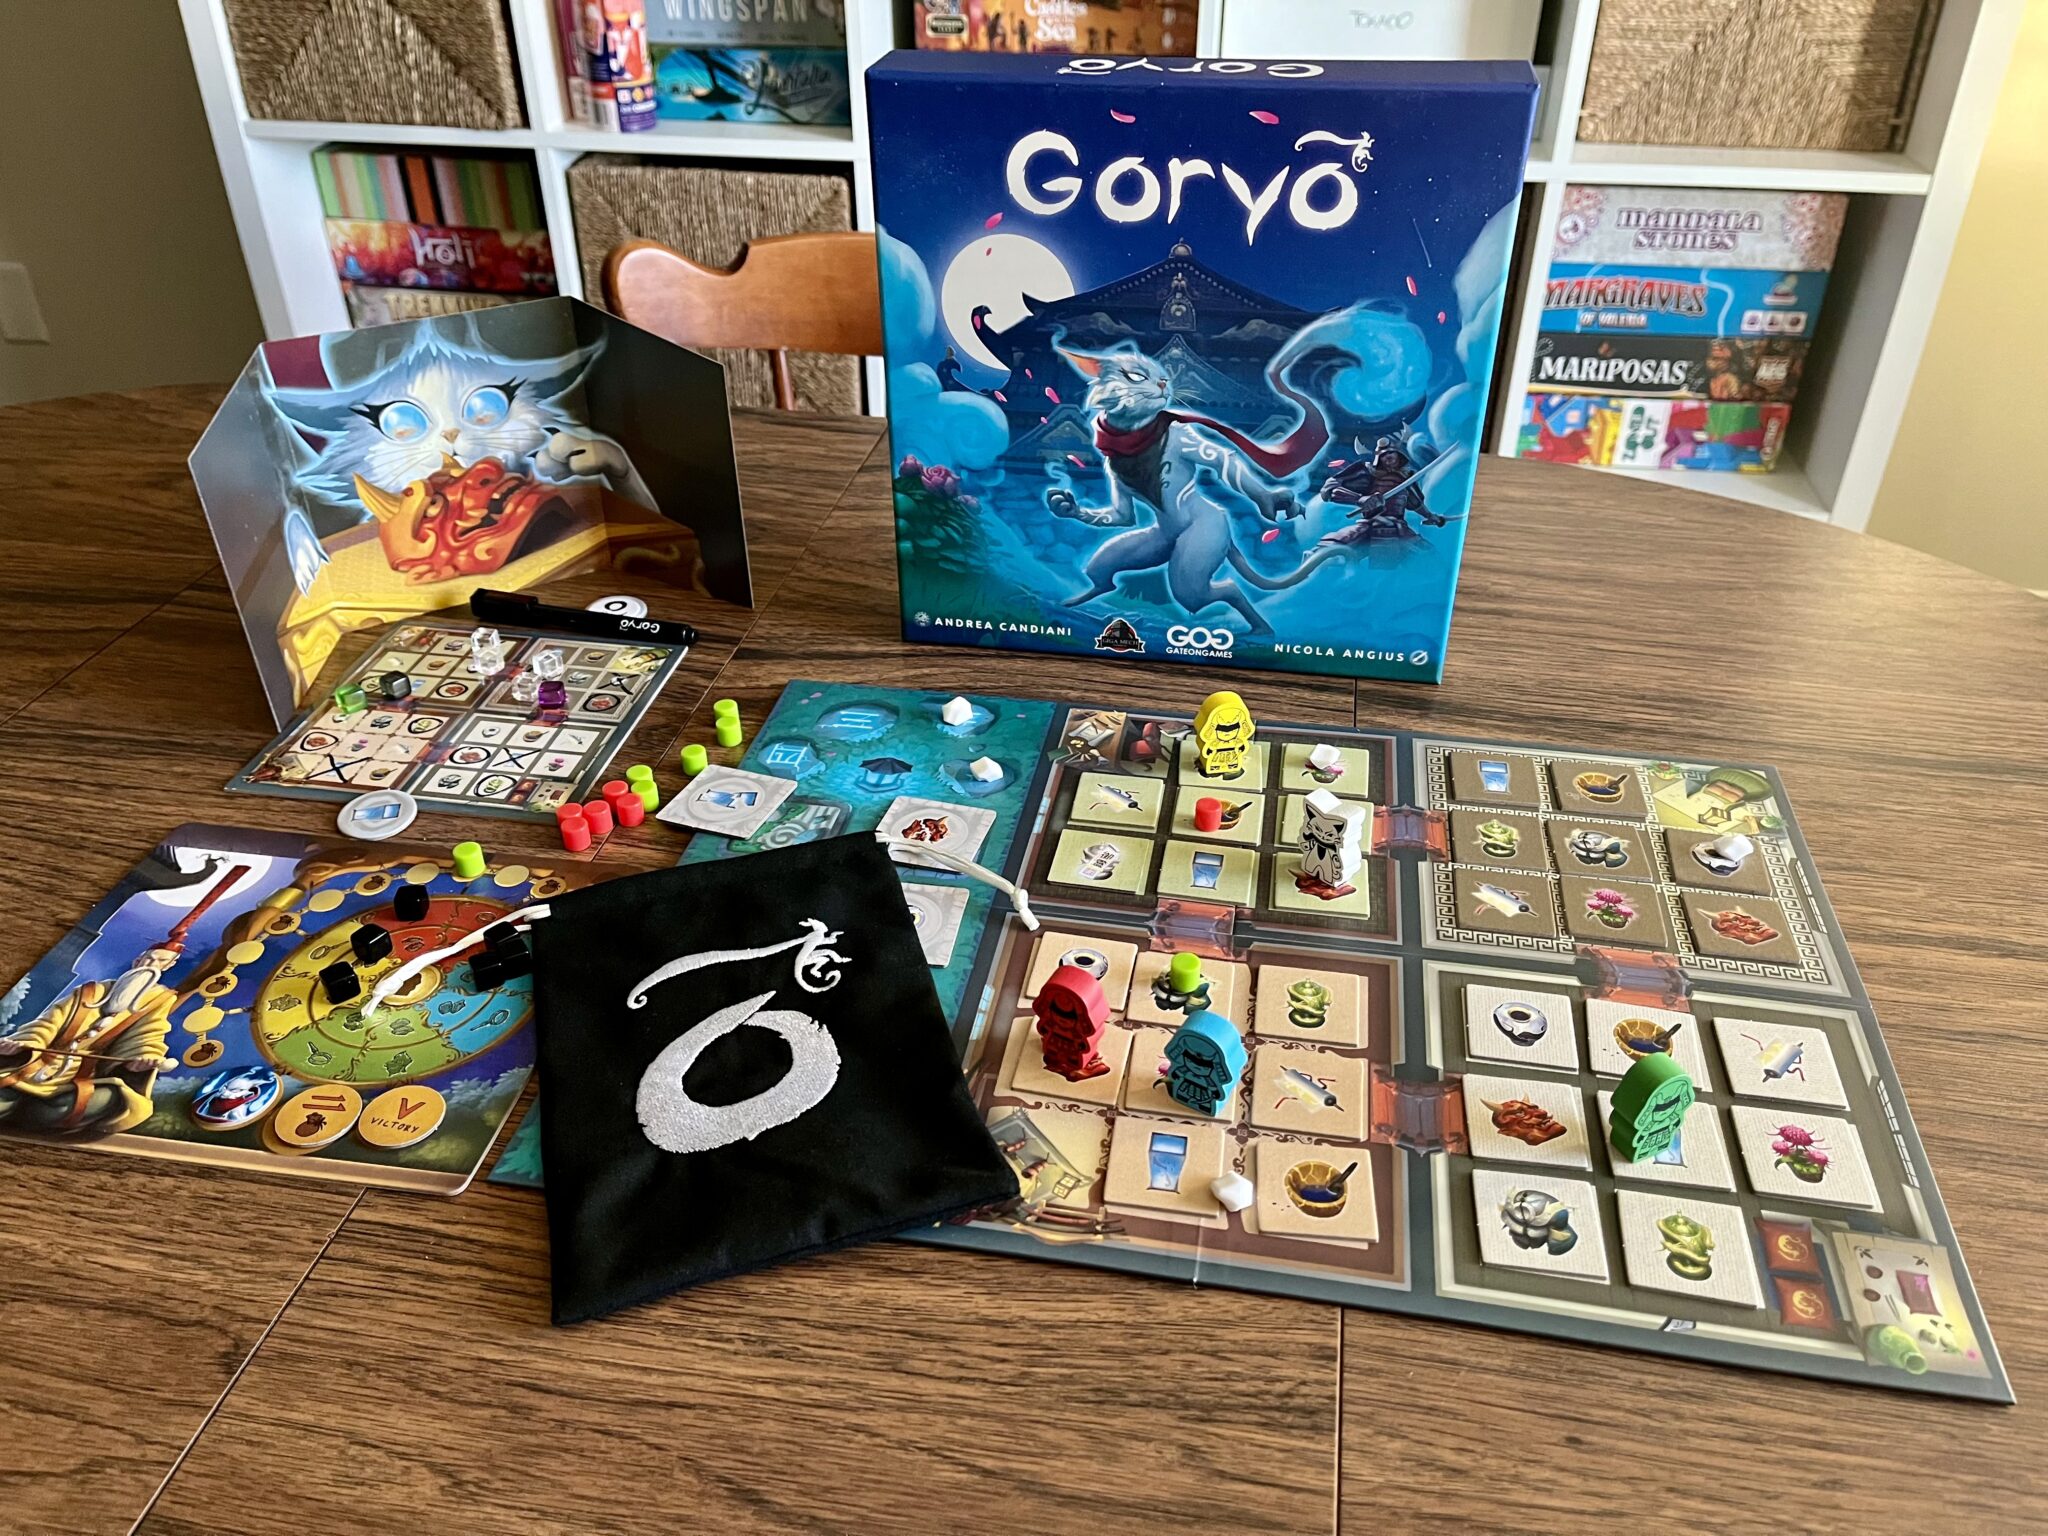 Goryo components on the table